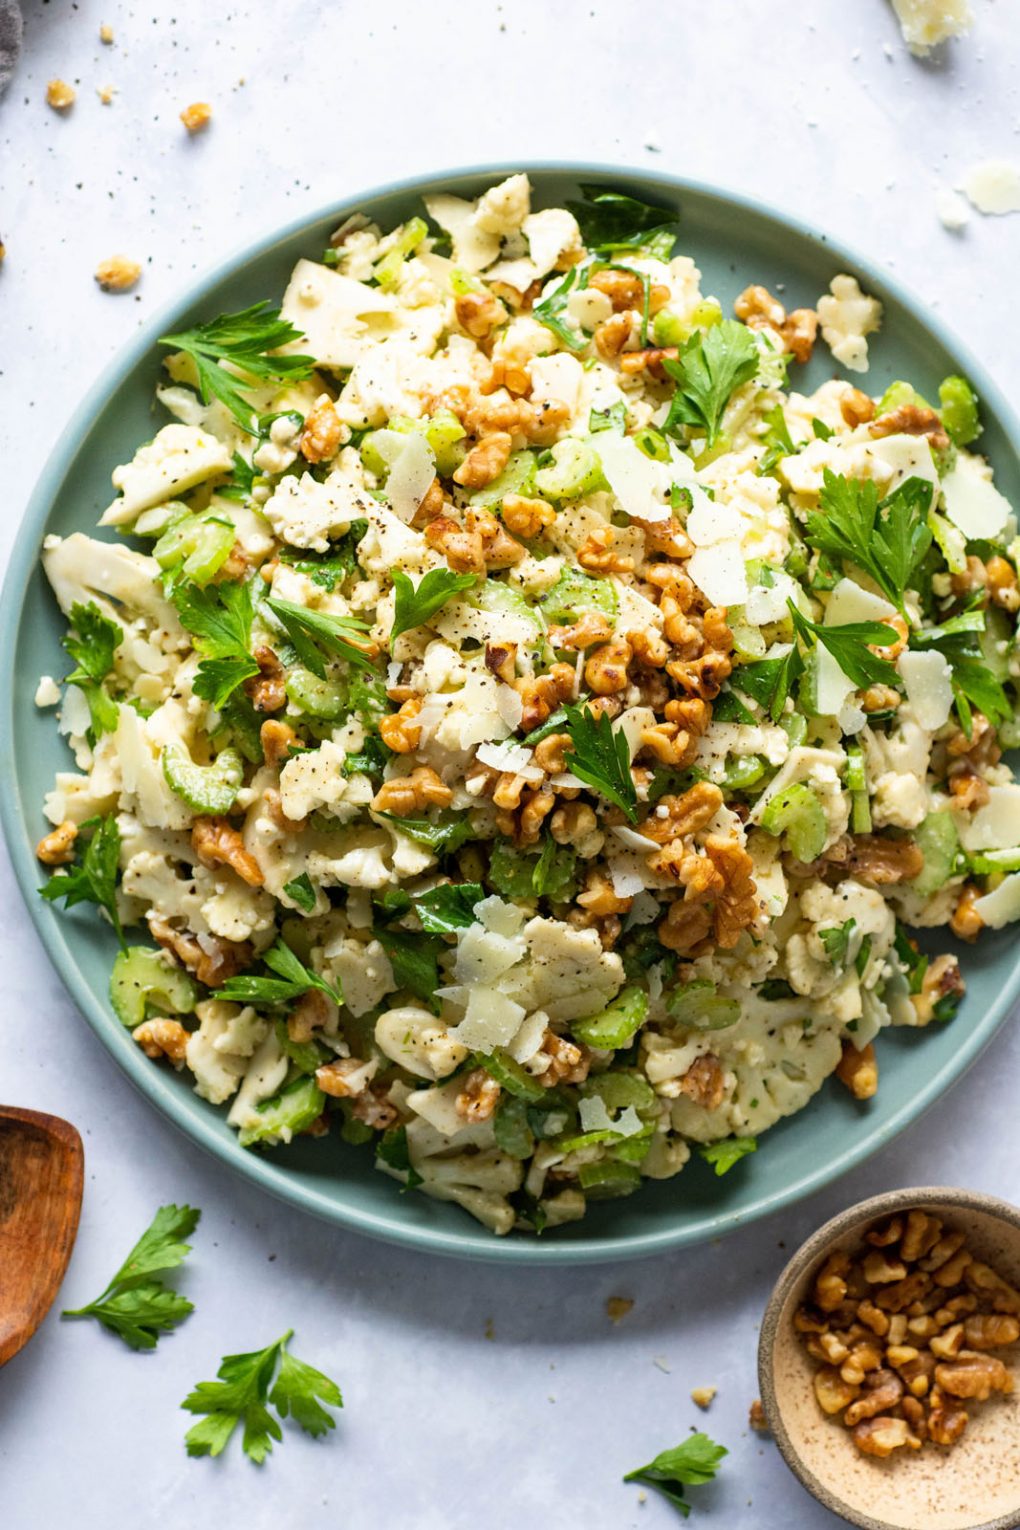 A large round plate with shaved cauliflower and celery salad topped with walnuts, parsley, and shave cheese. On a light background surrounded by bits of nuts, cheese, and parsley. Wooden salad serving utensils lie next to the plate. 